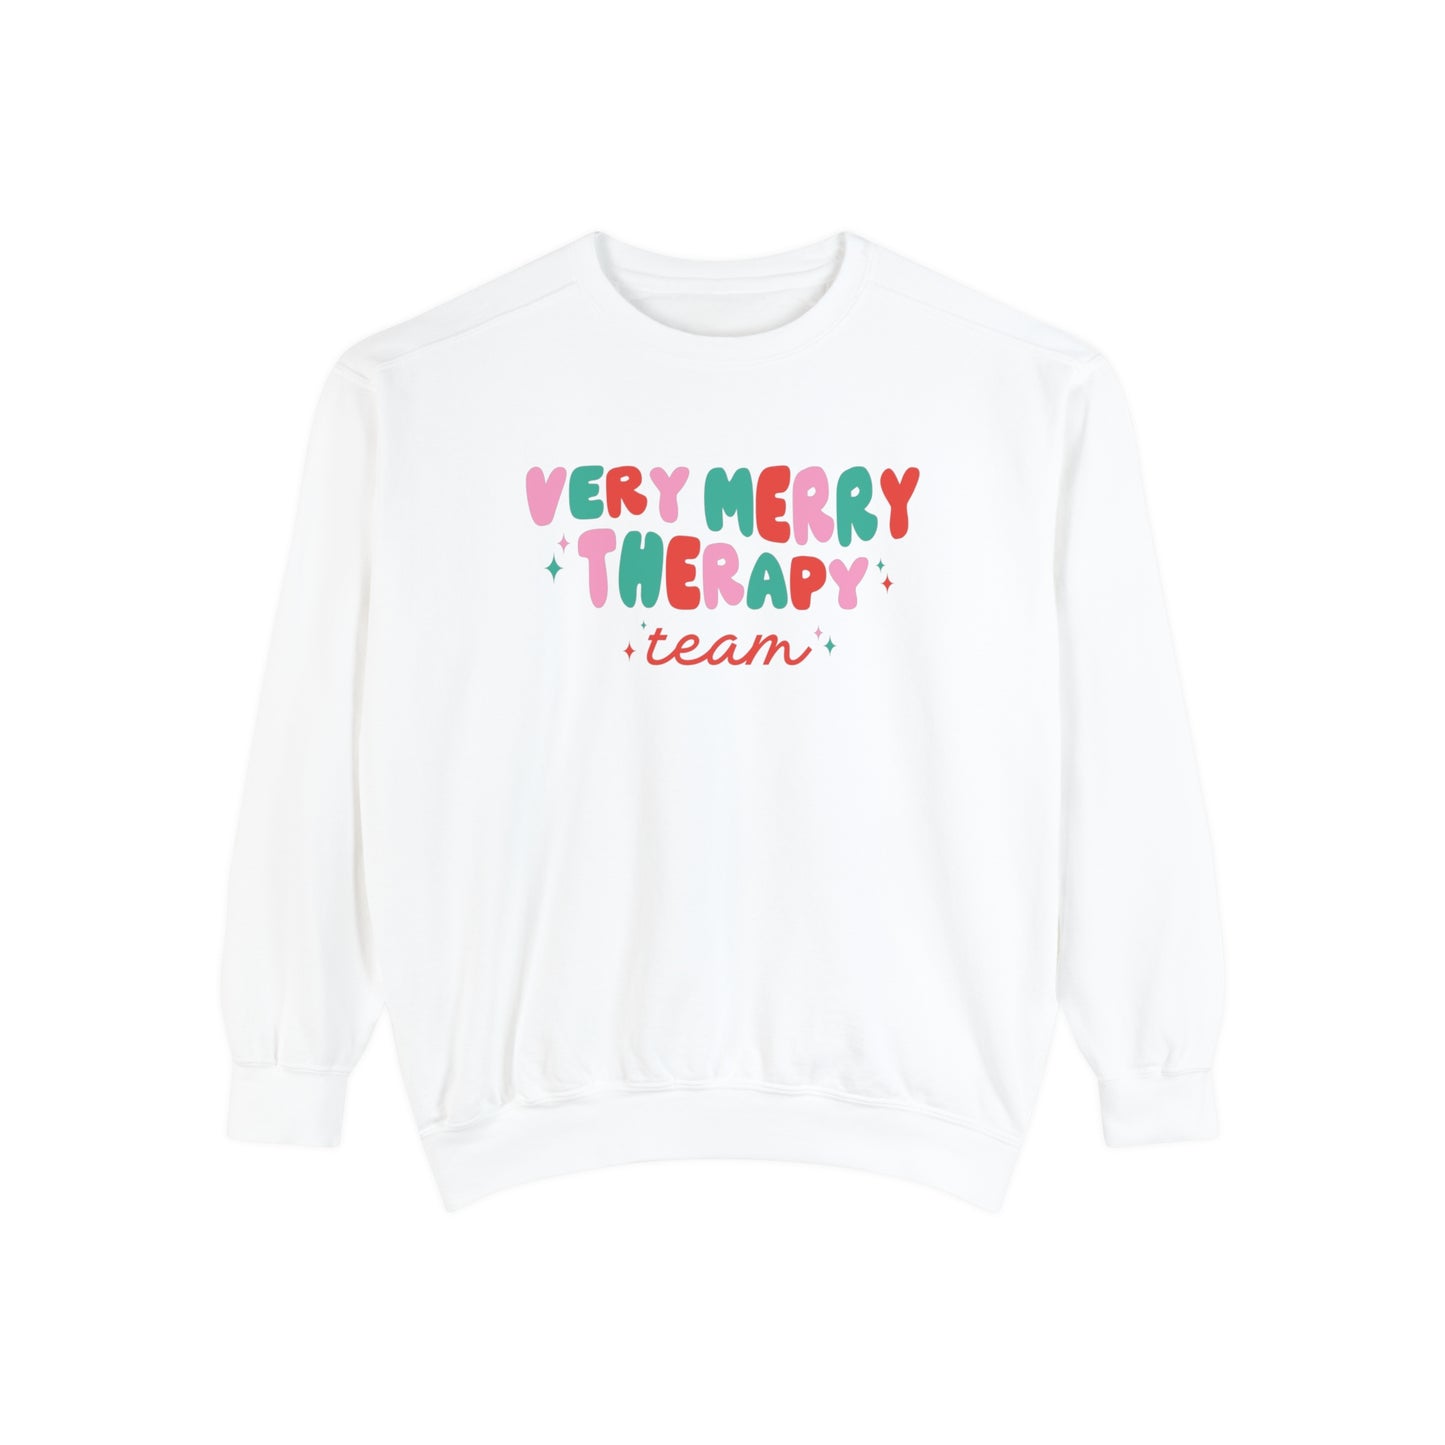 Very Merry Therapy Team Comfort Colors Sweatshirt